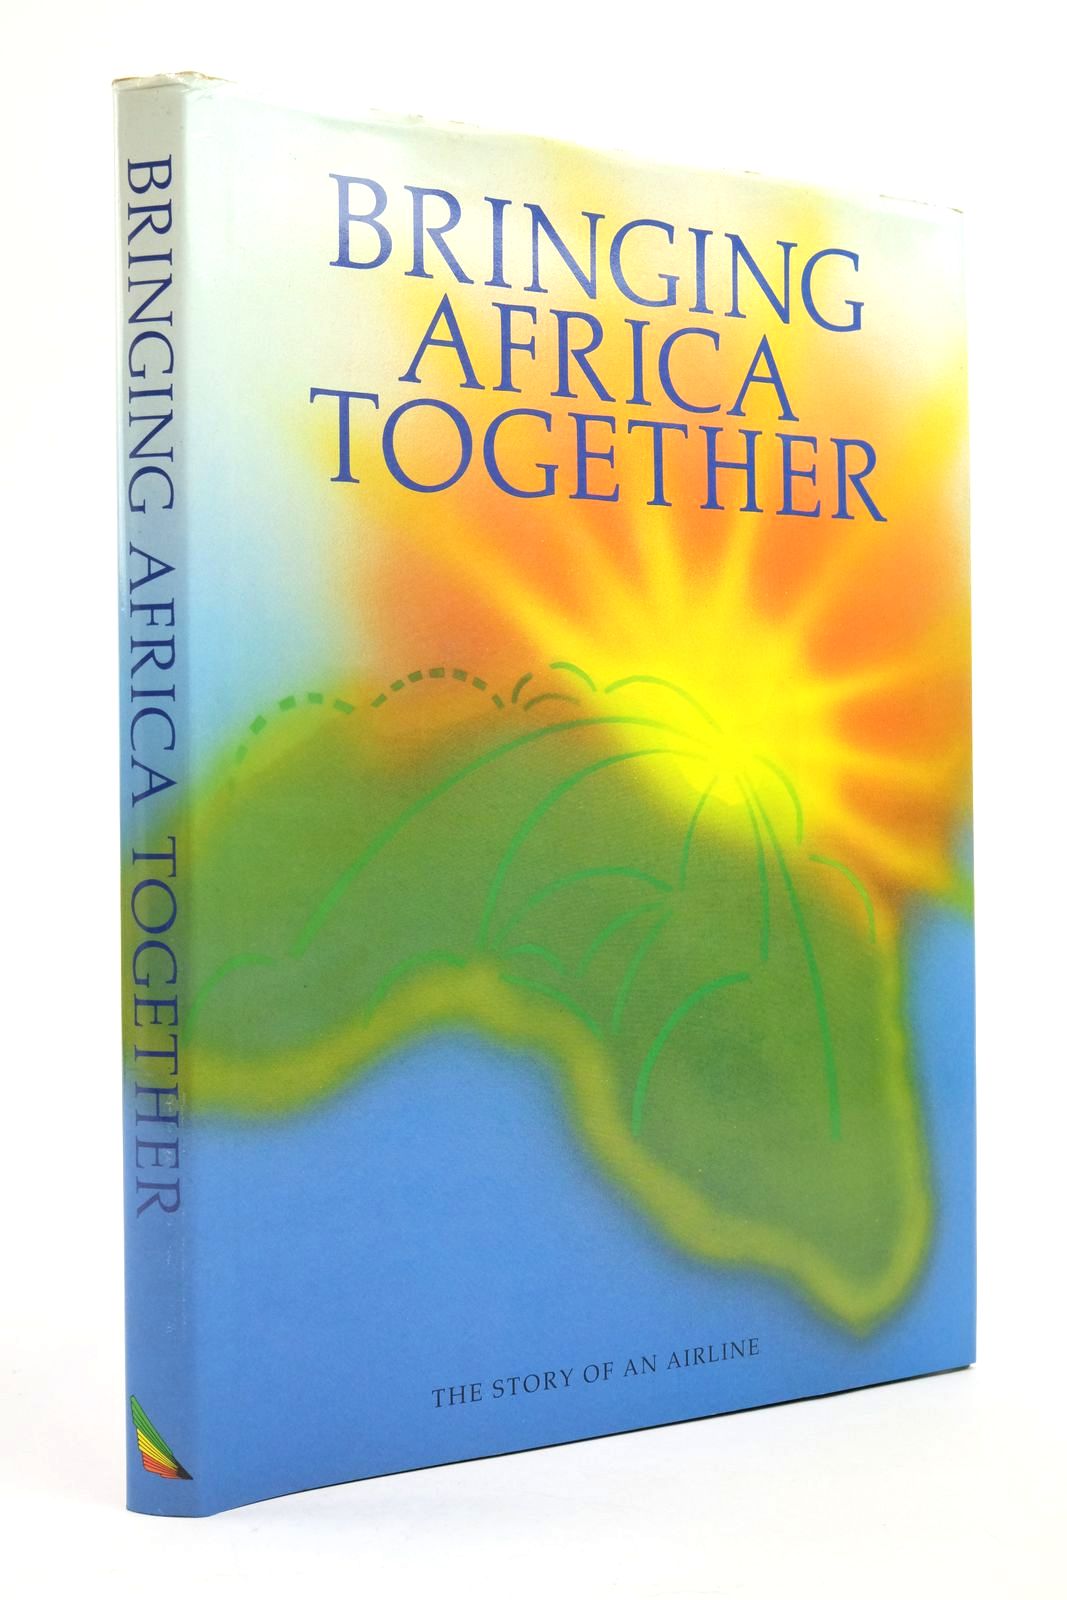 Photo of BRINGING AFRICA TOGETHER published by Ethiopian Airlines (STOCK CODE: 2138586)  for sale by Stella & Rose's Books